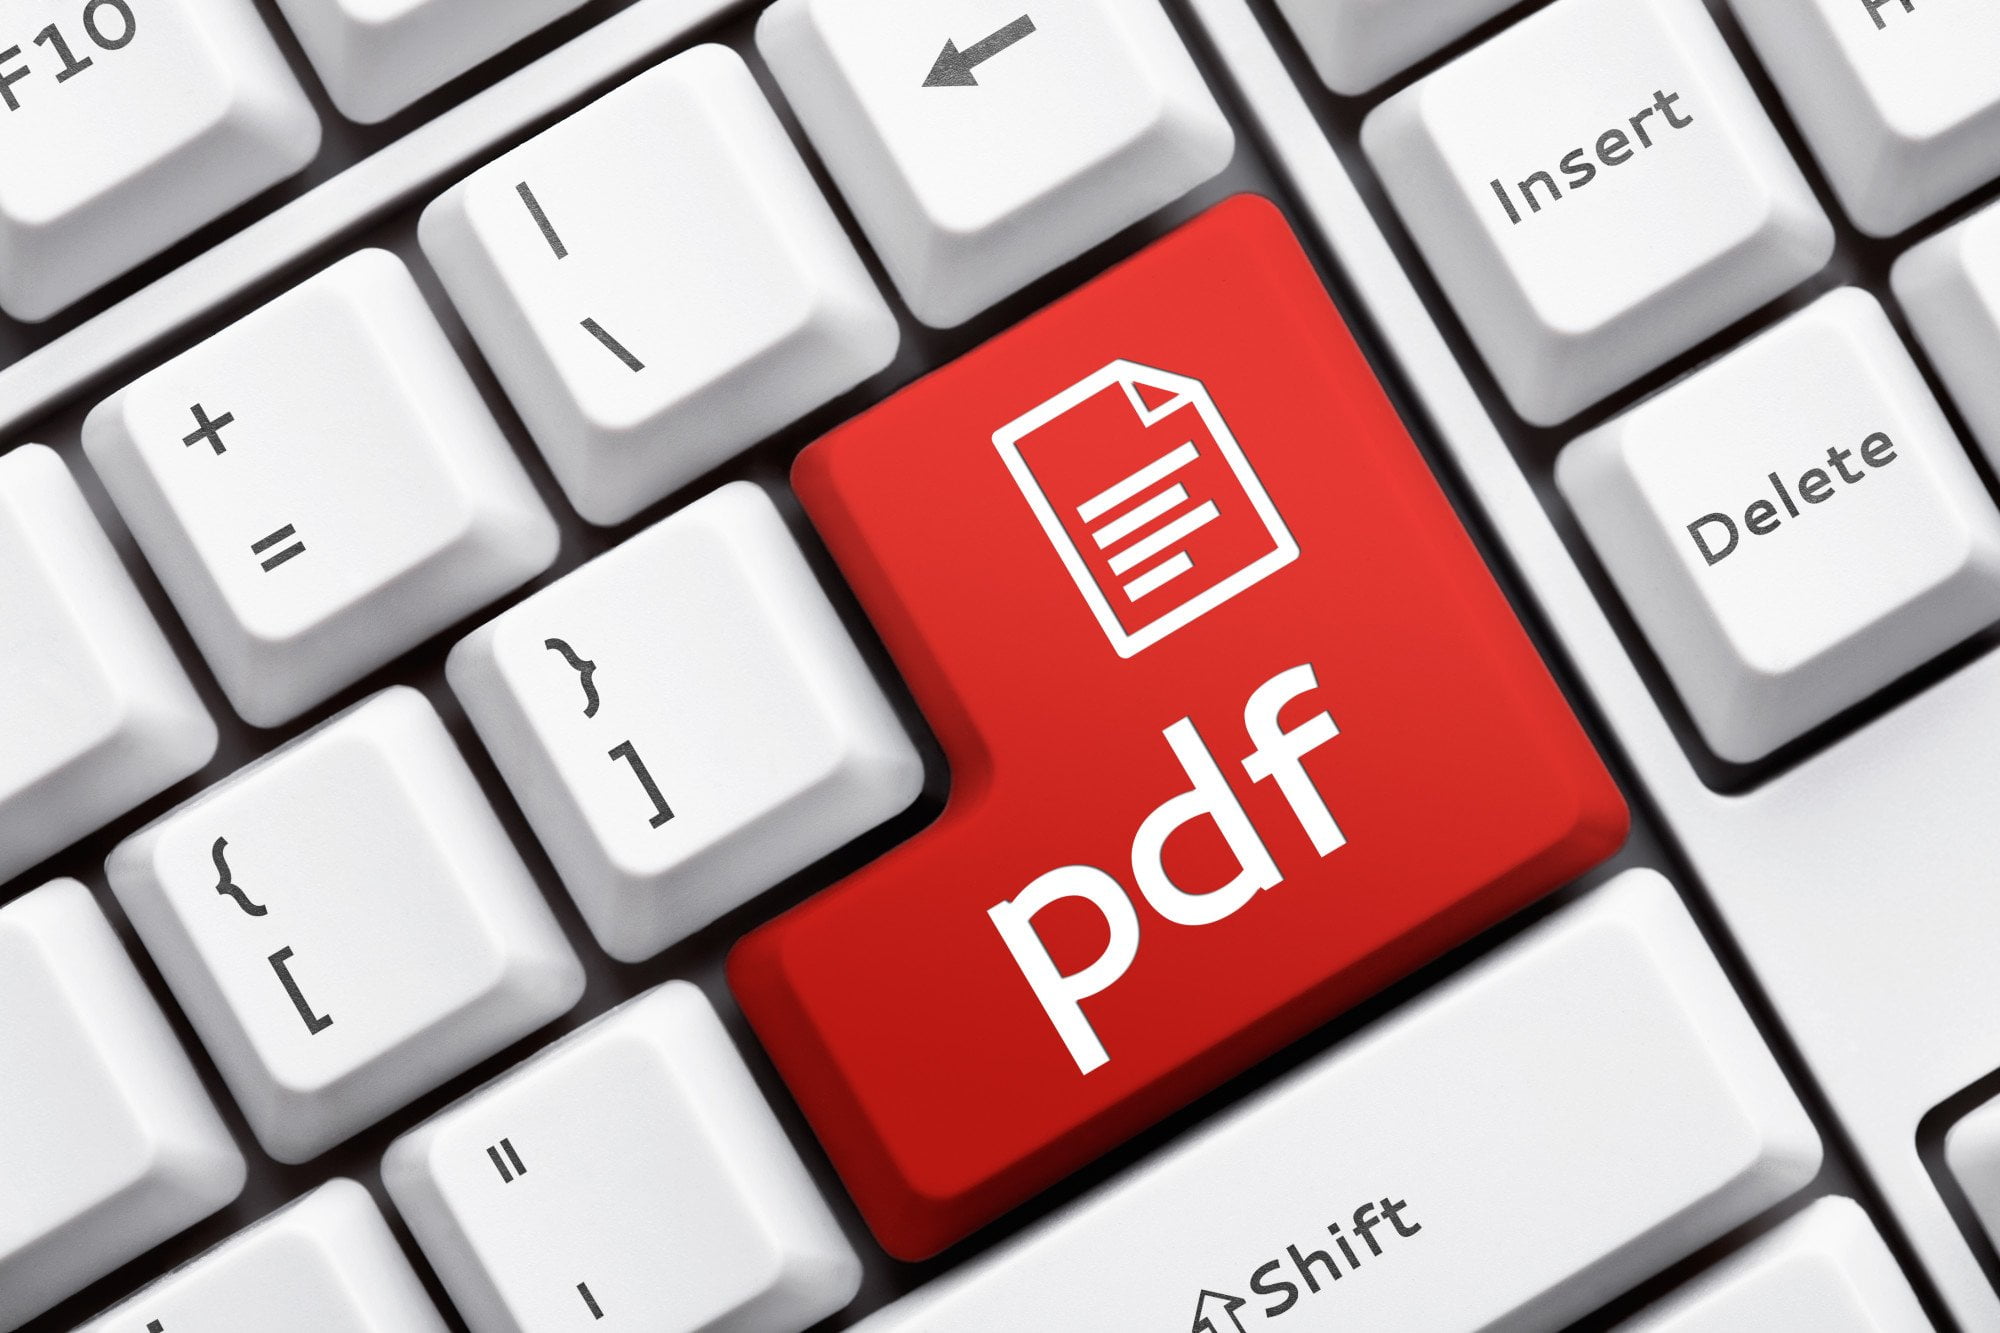 Want to know how to convert HTML to PDF on mac? Check this step-by-step guide and discover the essential tools and instructions you need.